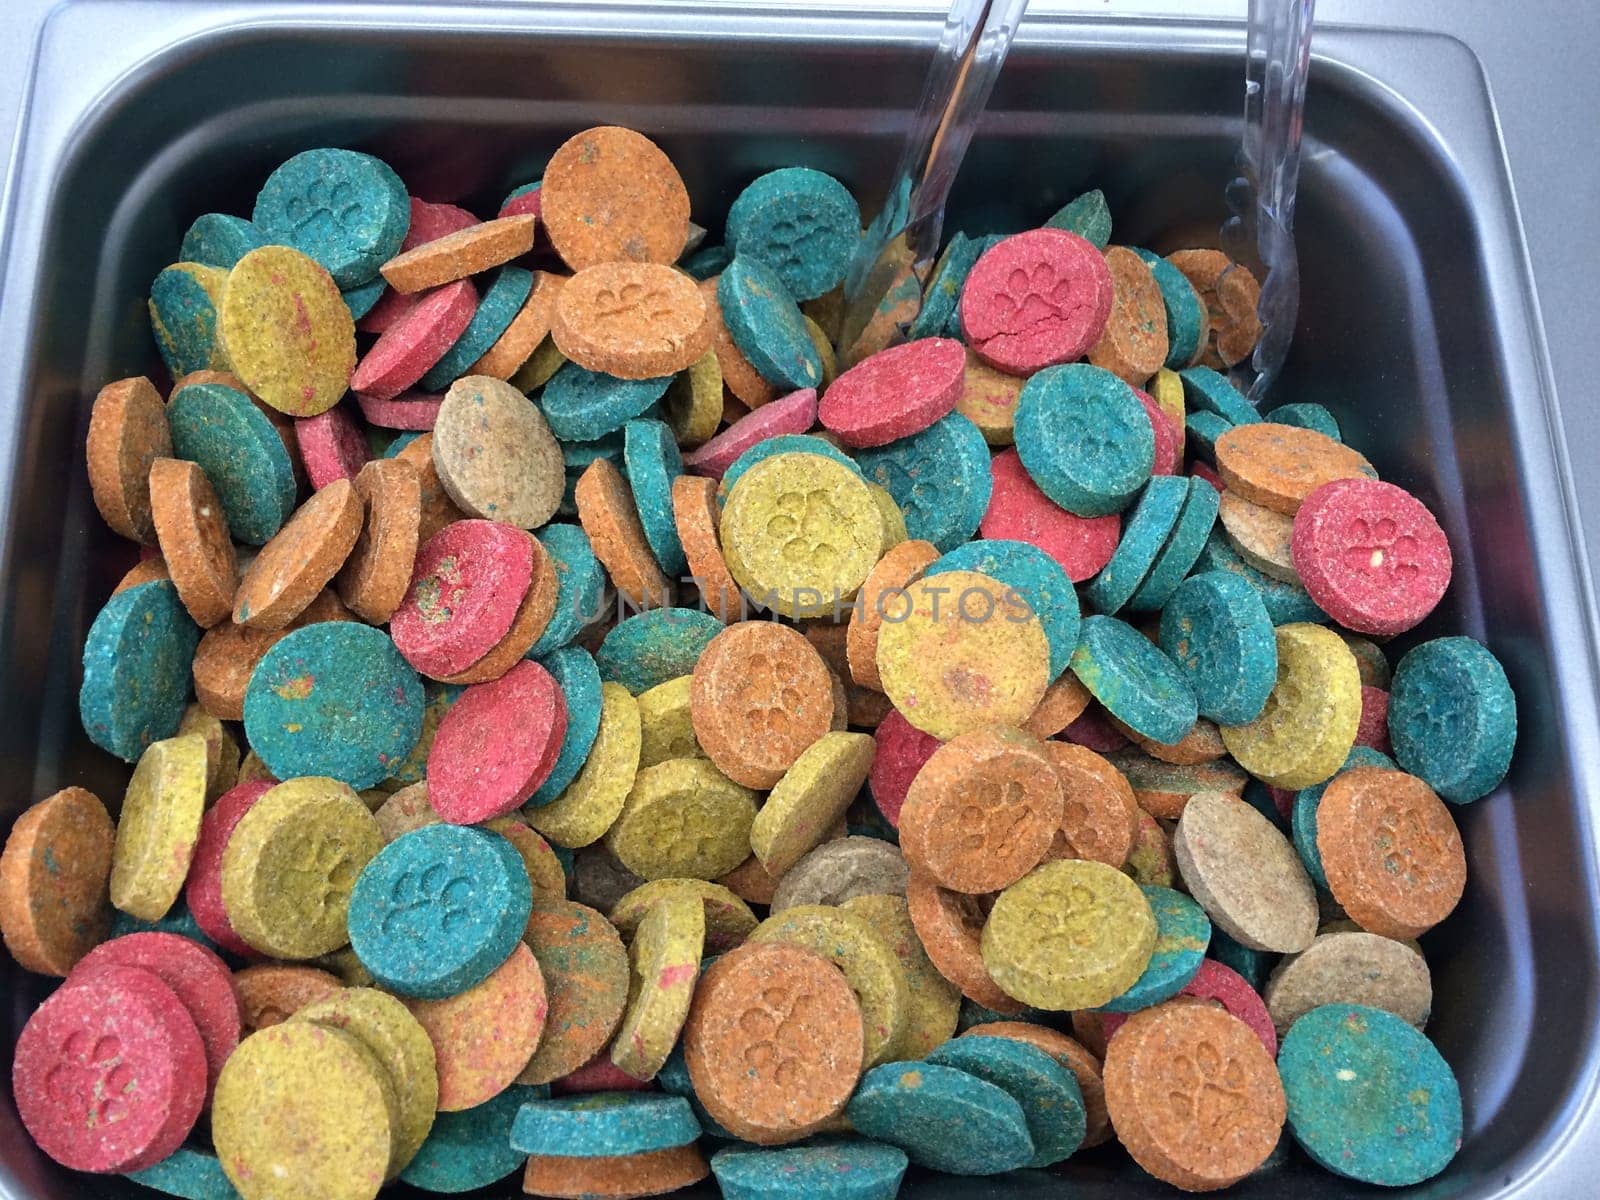 Bin of Colorful Dog Cookies, Many Treats for Good Dogs by grumblytumbleweed